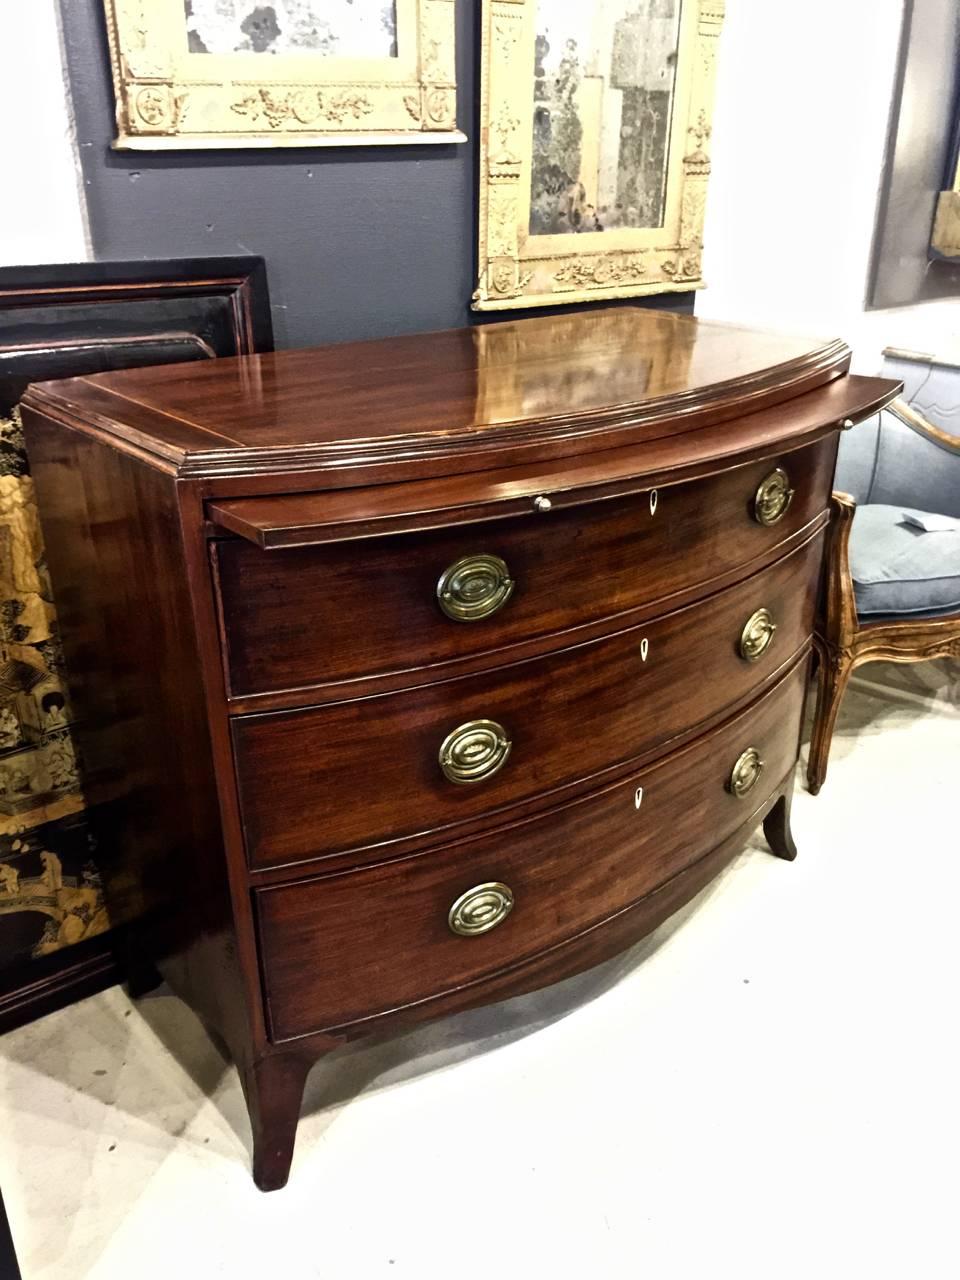 This a great beefy late 18th-early 19th century. George III bow front chest of drawers with brushing slide. The chest, although large, has elegant proportions, French feet, a brushing slide, good figured mahogany, ivory escutcheons and original